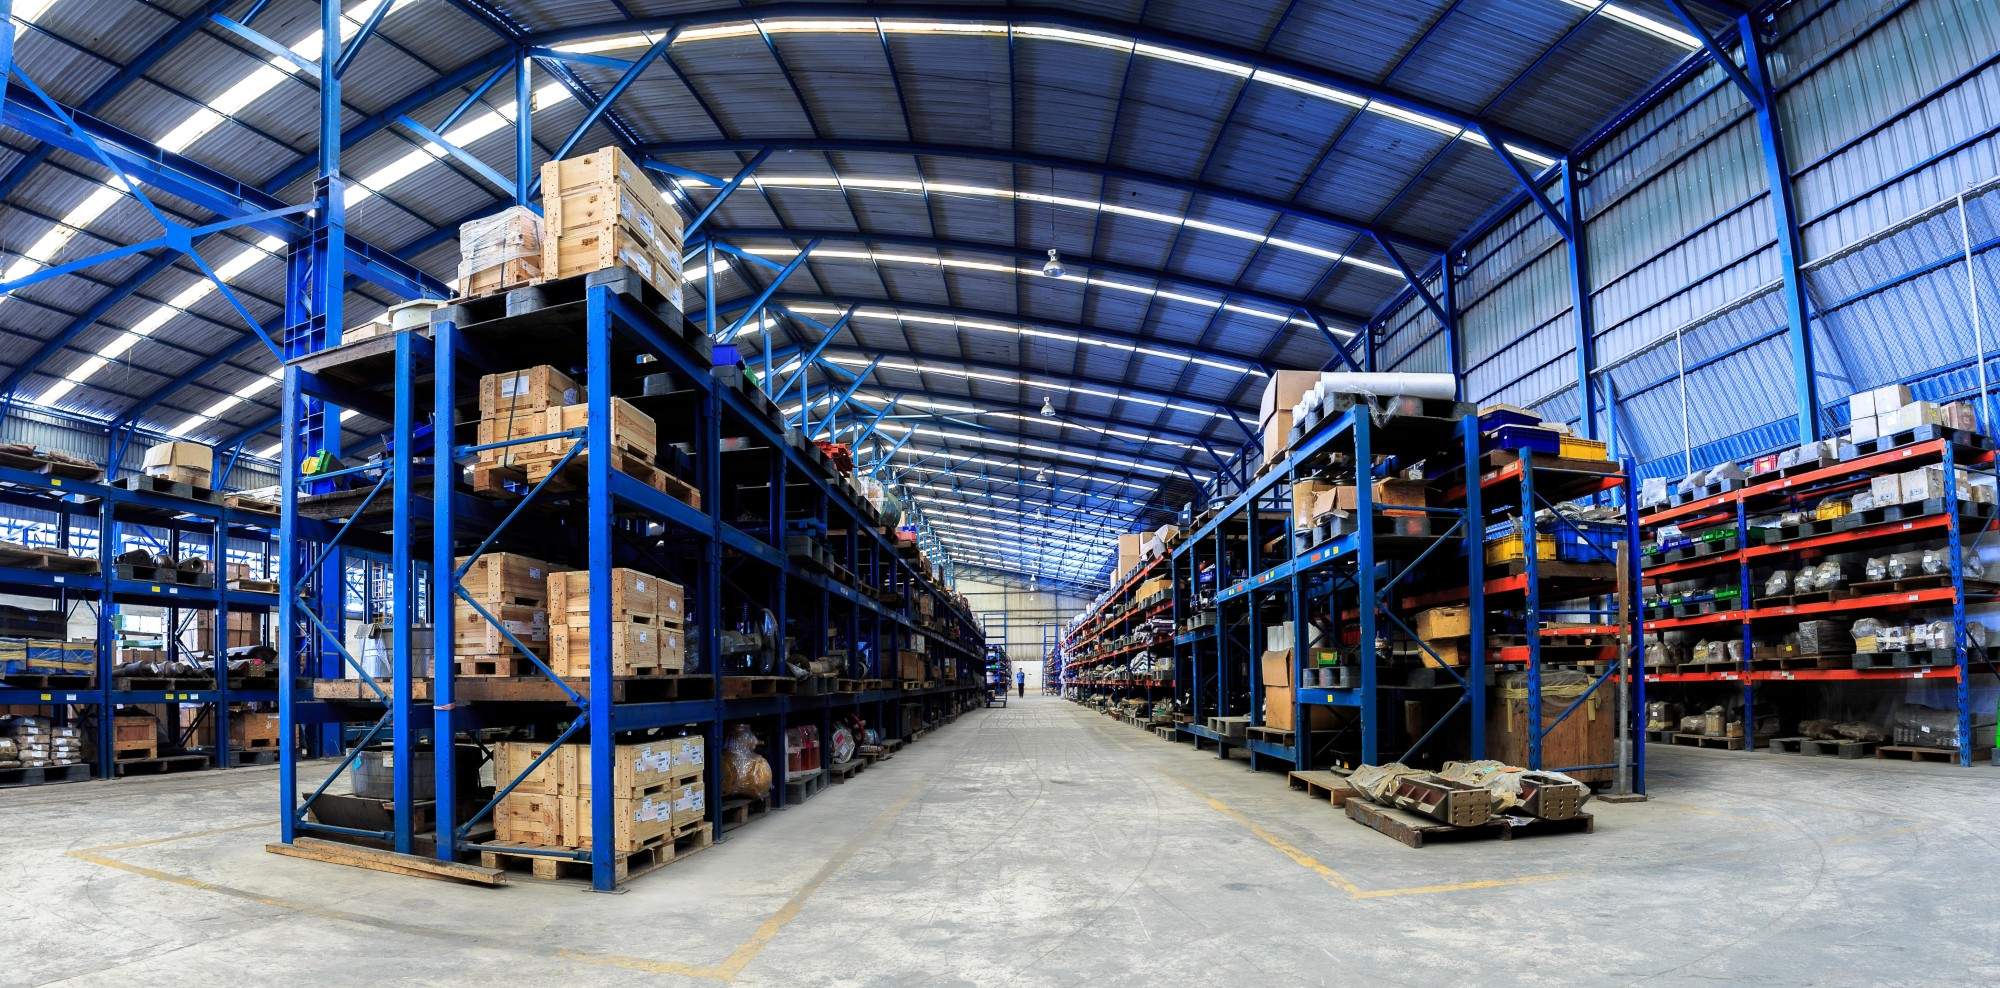 6 Things You Should Know About Warehouse and Distribution in 2022